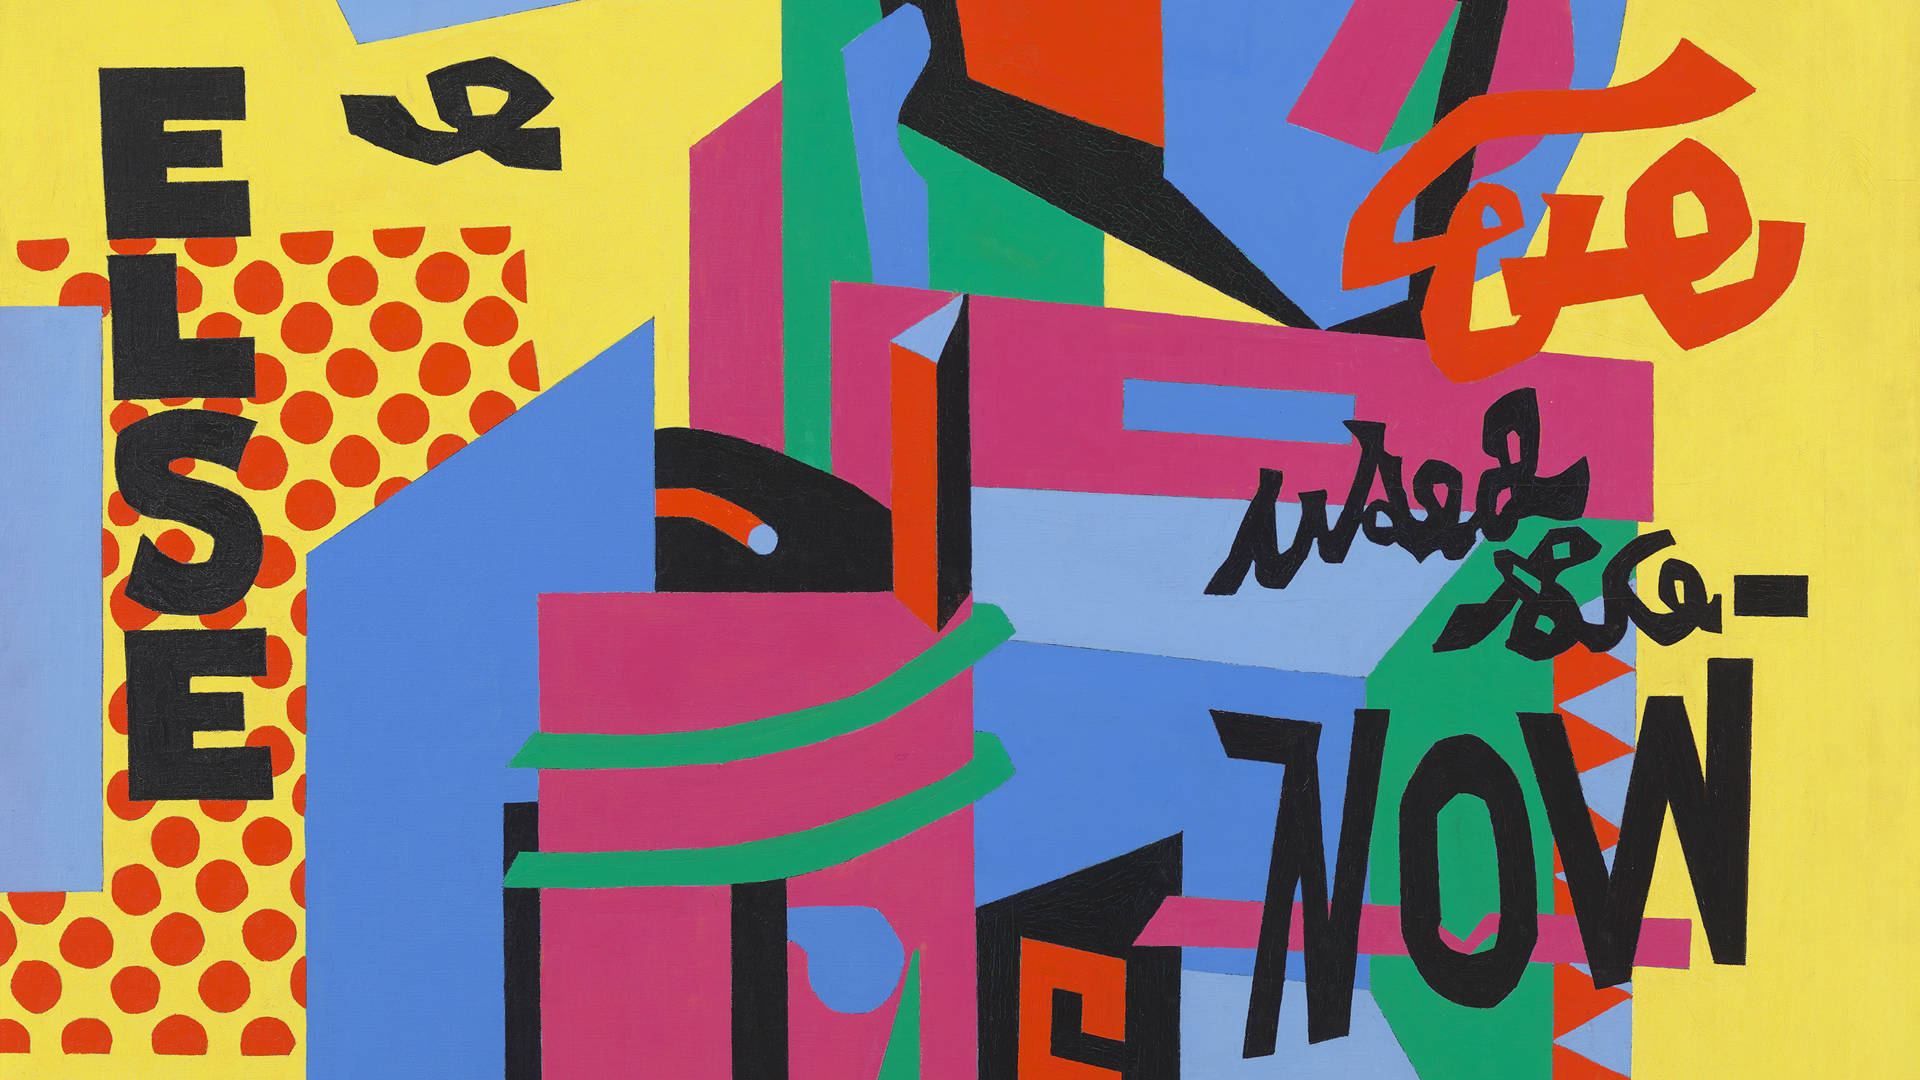 Stuart Davis, 'Owh! in Sao Pão' (detail), 1951. Courtesy of the Fine Arts Museums of San Francisco